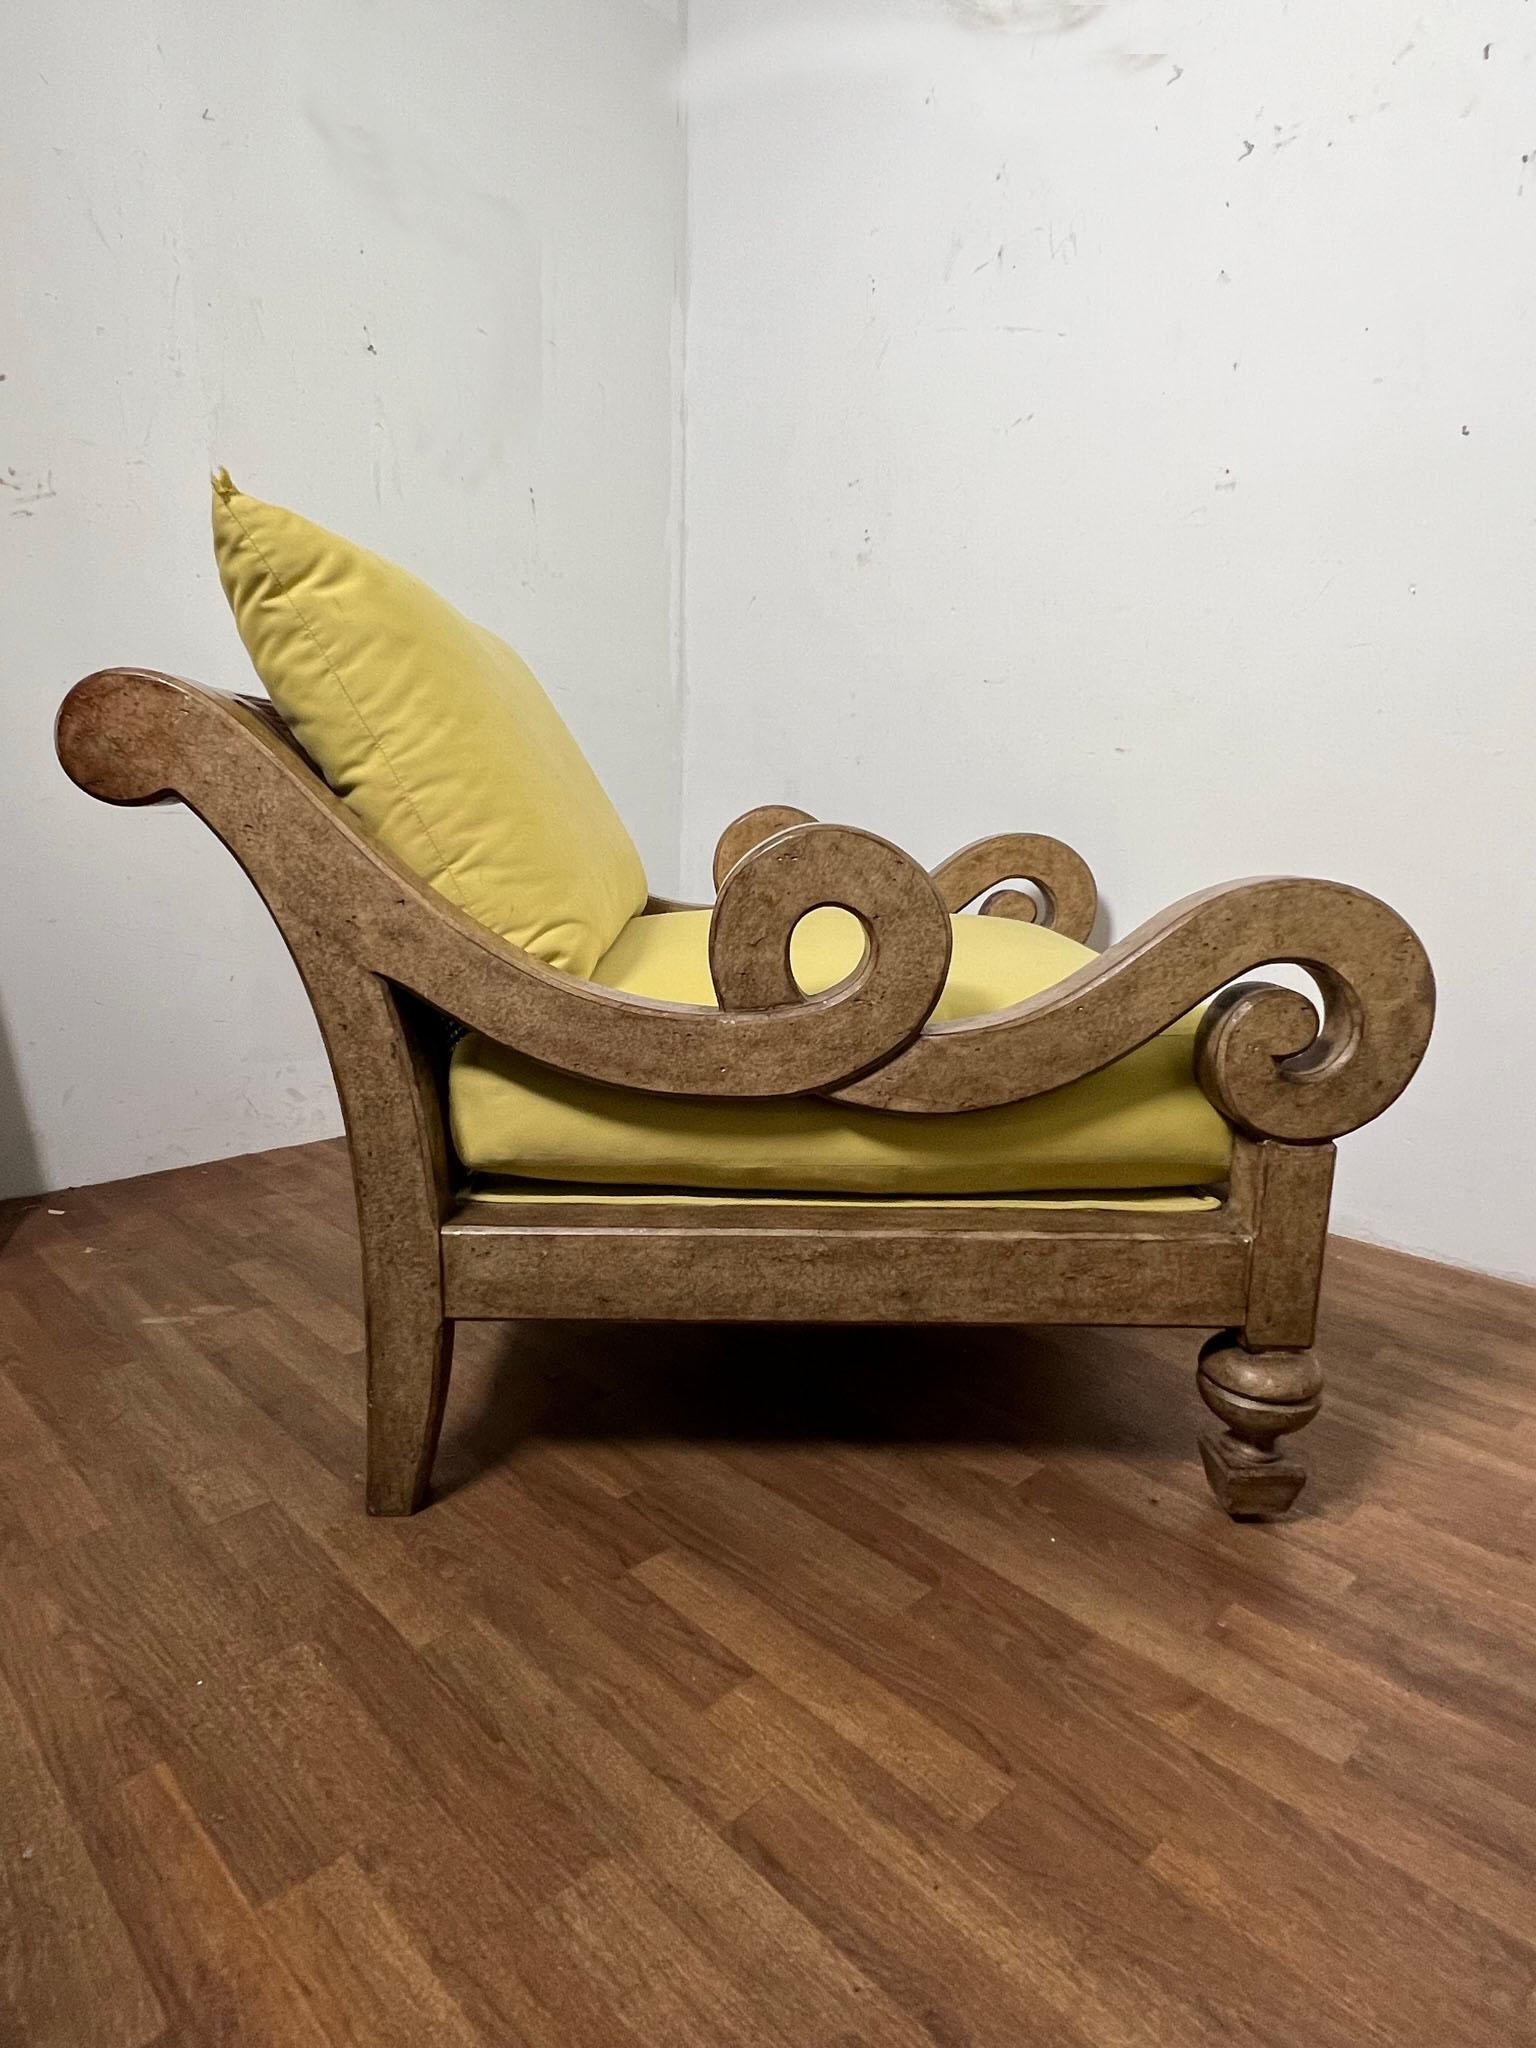 An extremely oversized post modern lounge chair in burled finish with serpentine arms, including a matching ottoman, by Marge Carson, ca. 1980s.

Chair measures 43.25